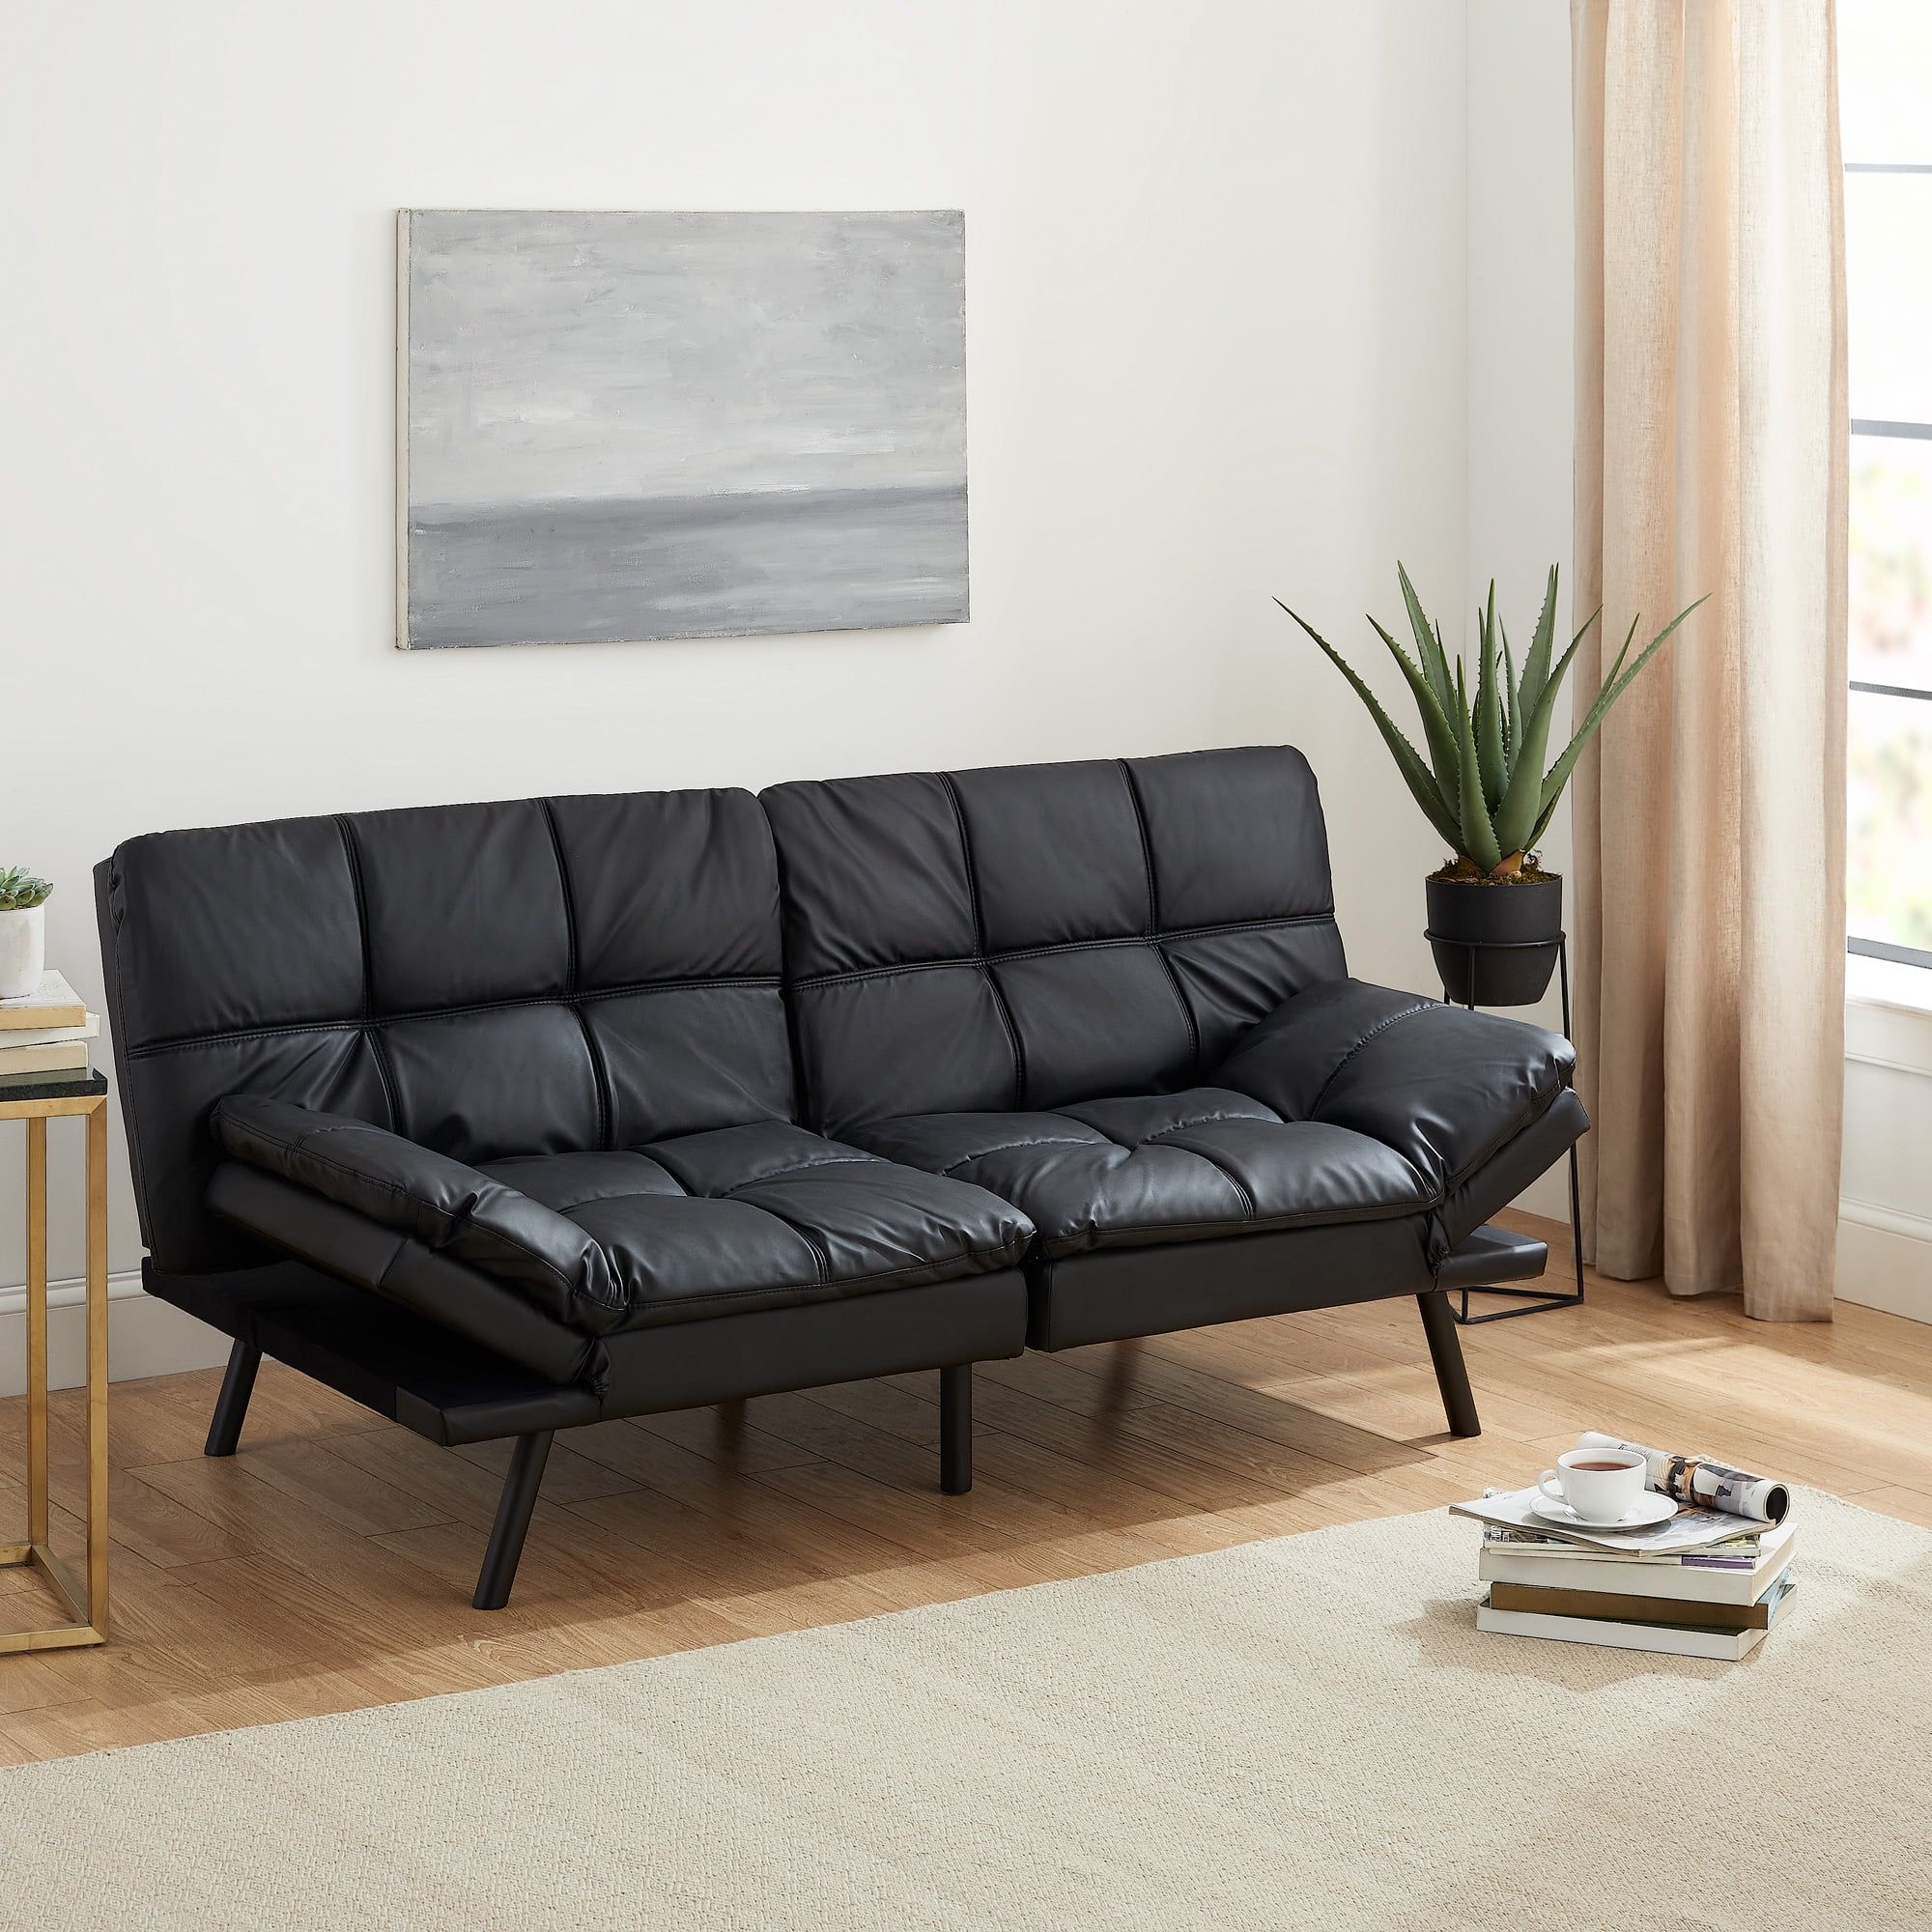 Mainstays Memory Foam Futon, Black Faux Leather – Walmart Intended For Black Faux Suede Memory Foam Sofas (View 6 of 20)